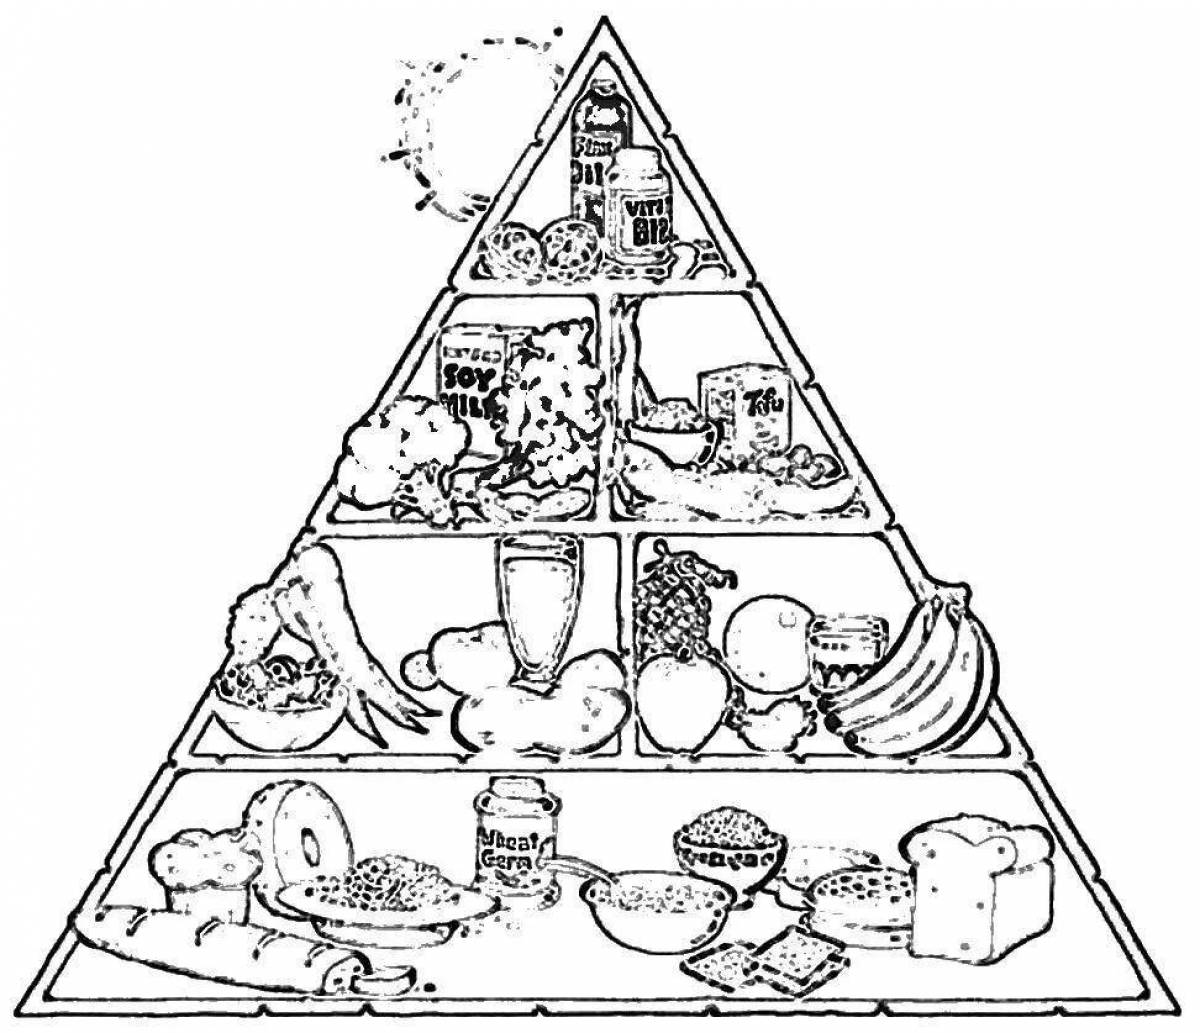 Coloring page funny food pyramid